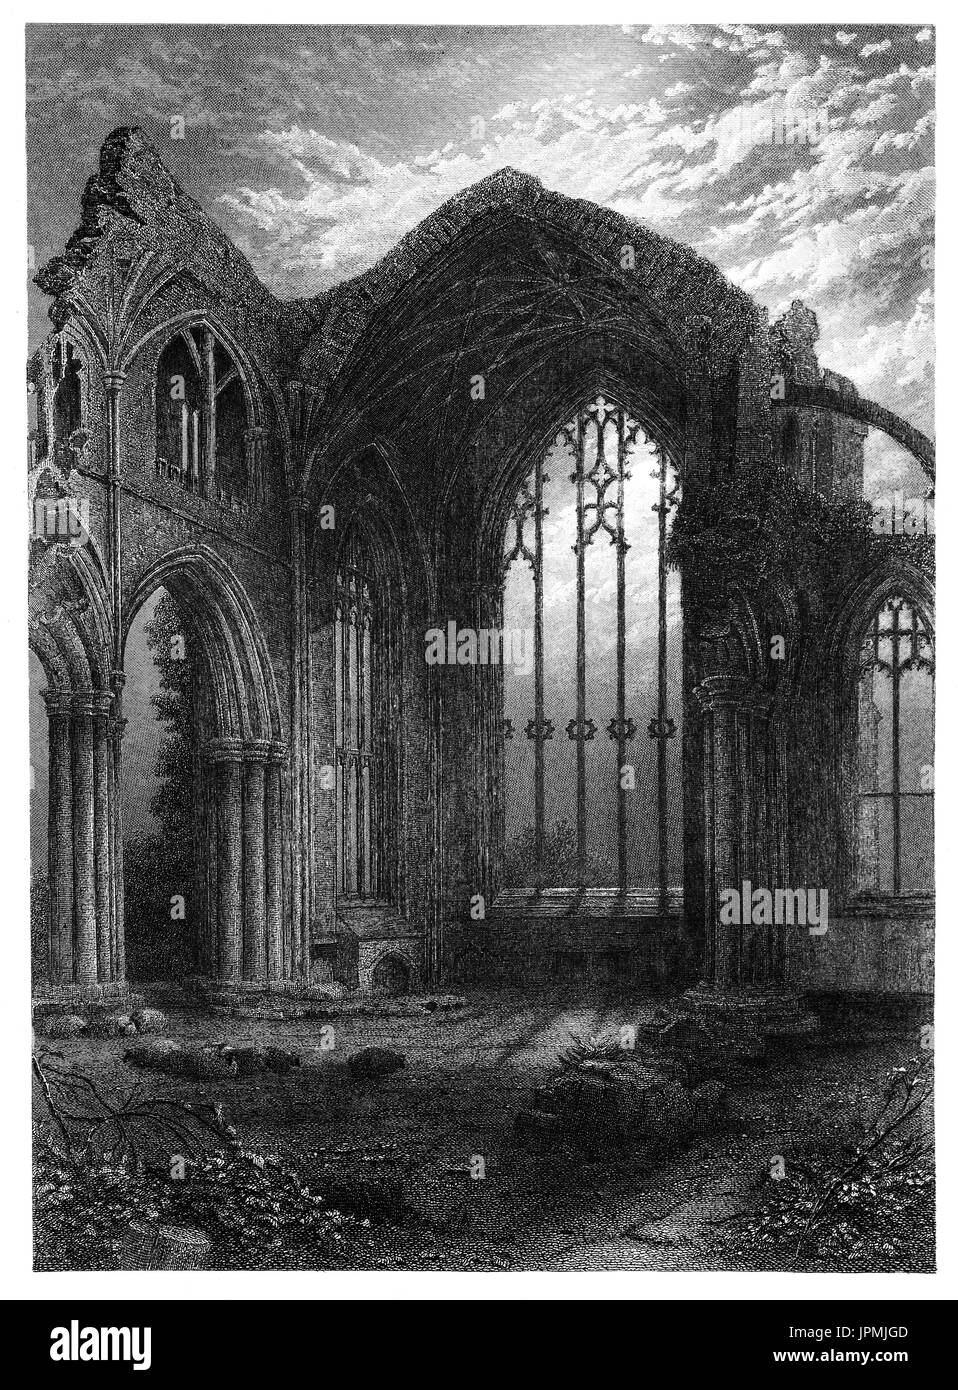 1870: St Mary's Abbey, Melrose is a partly ruined Gothic  monastery of the Cistercian order in Melrose, Roxburghshire, in the Scottish Borders. It was founded in 1136 by Cistercian monks at the request of King David I of Scotland, and was the chief house of that order in the country until the Reformation. Stock Photo